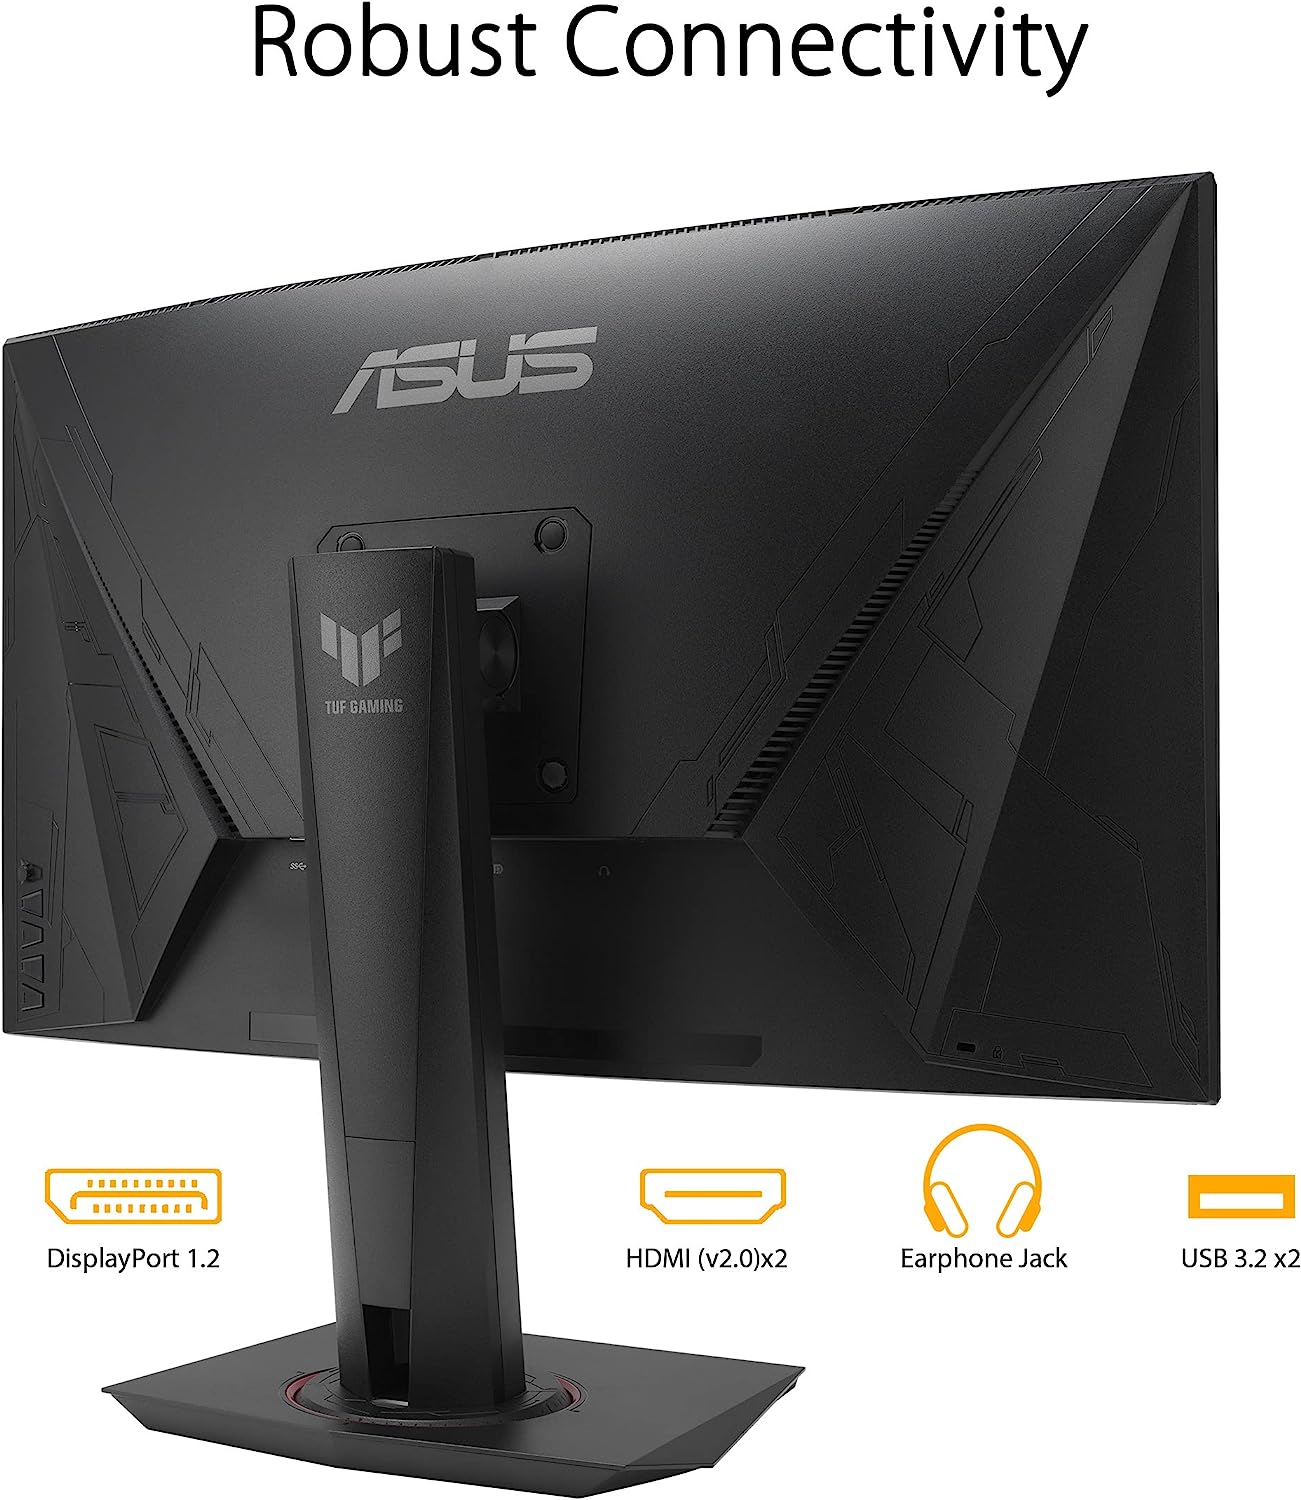 ASUS Gaming Monitor 27 curved 240hz 1ms